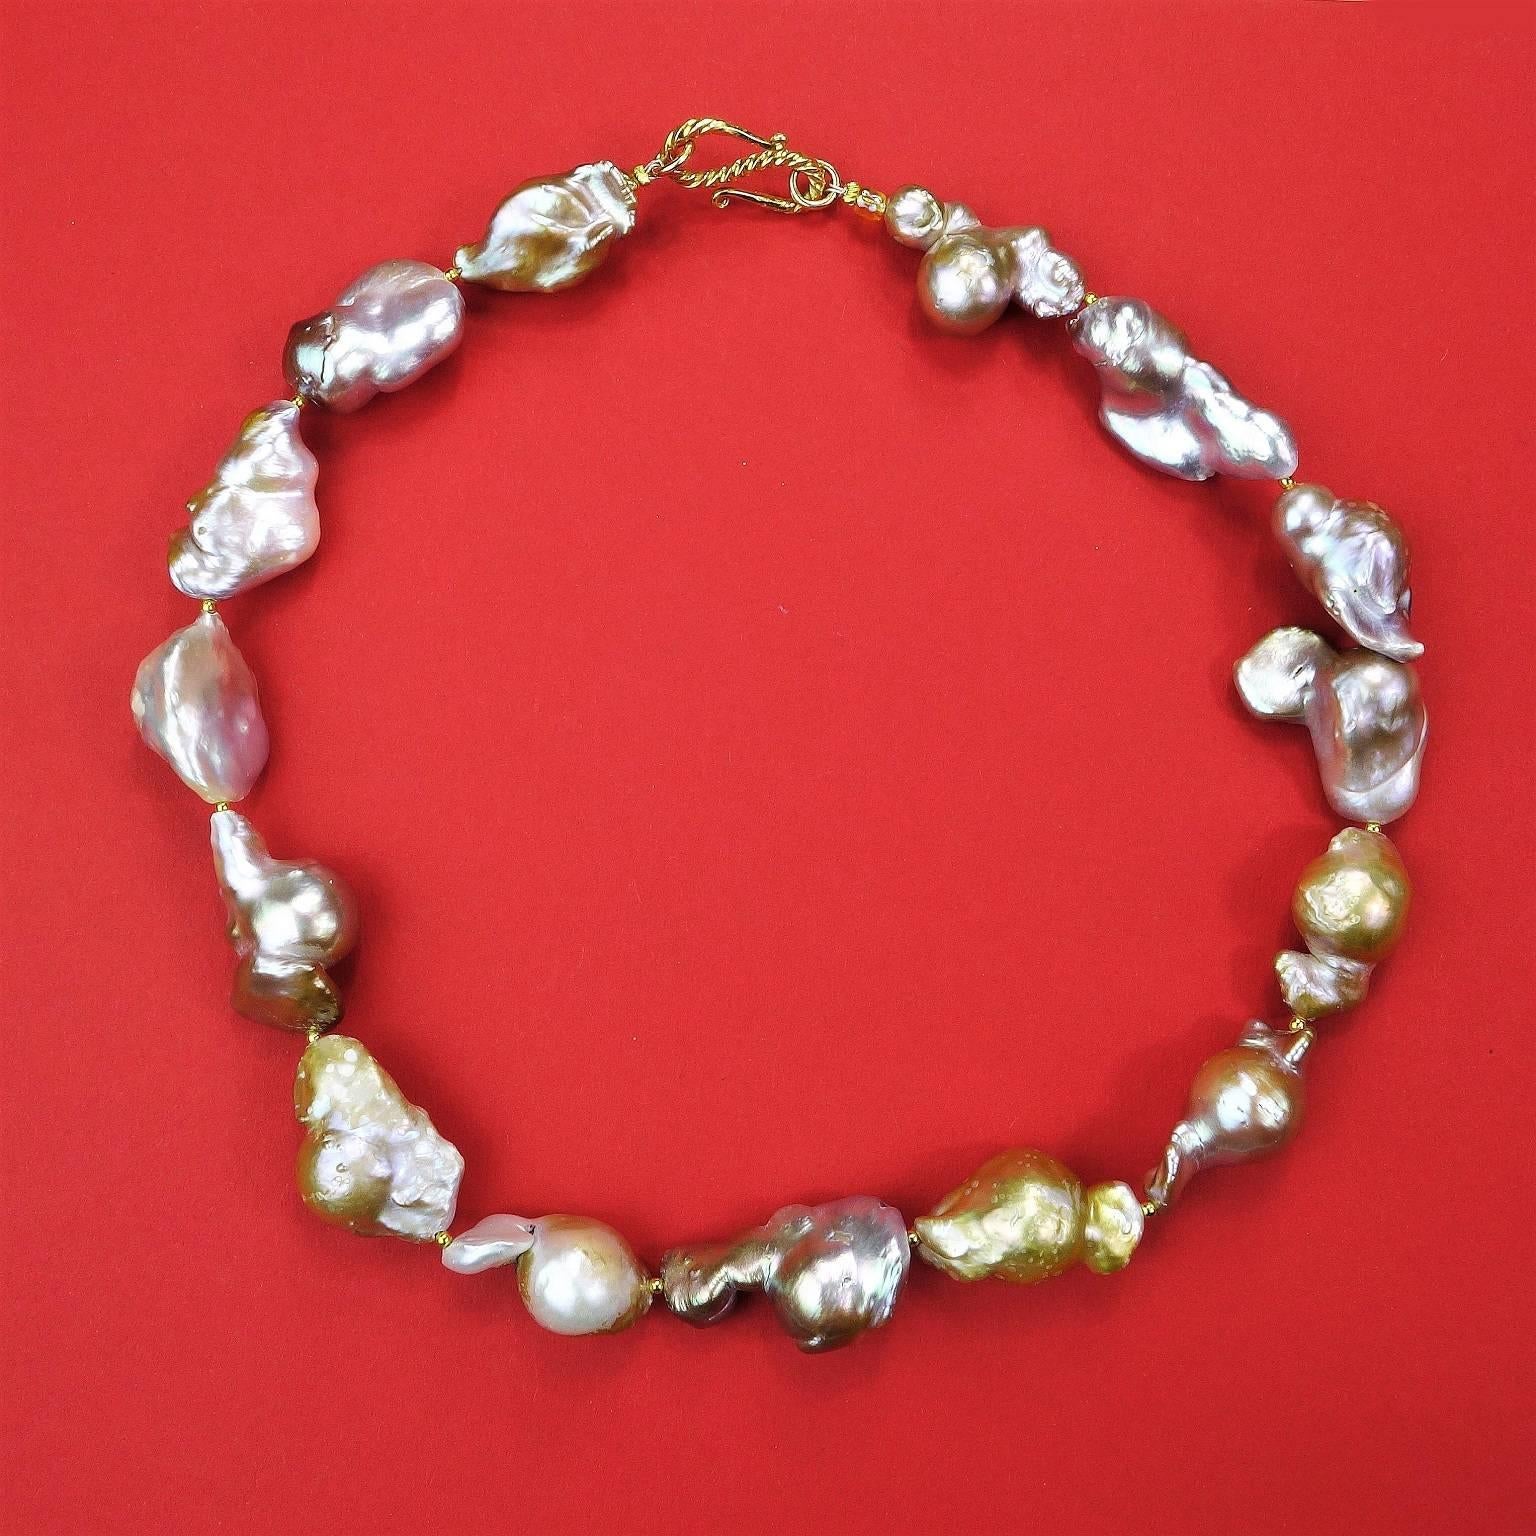 Silvery-Gold tone Iridescent Large Baroque Pearl Necklace. These gorgeous freeform Baroque Pearls flash pink and yellow in addition to the basic tones of silver, gold, gray, and mauve.  They are each very individual shapes which create a unique 18